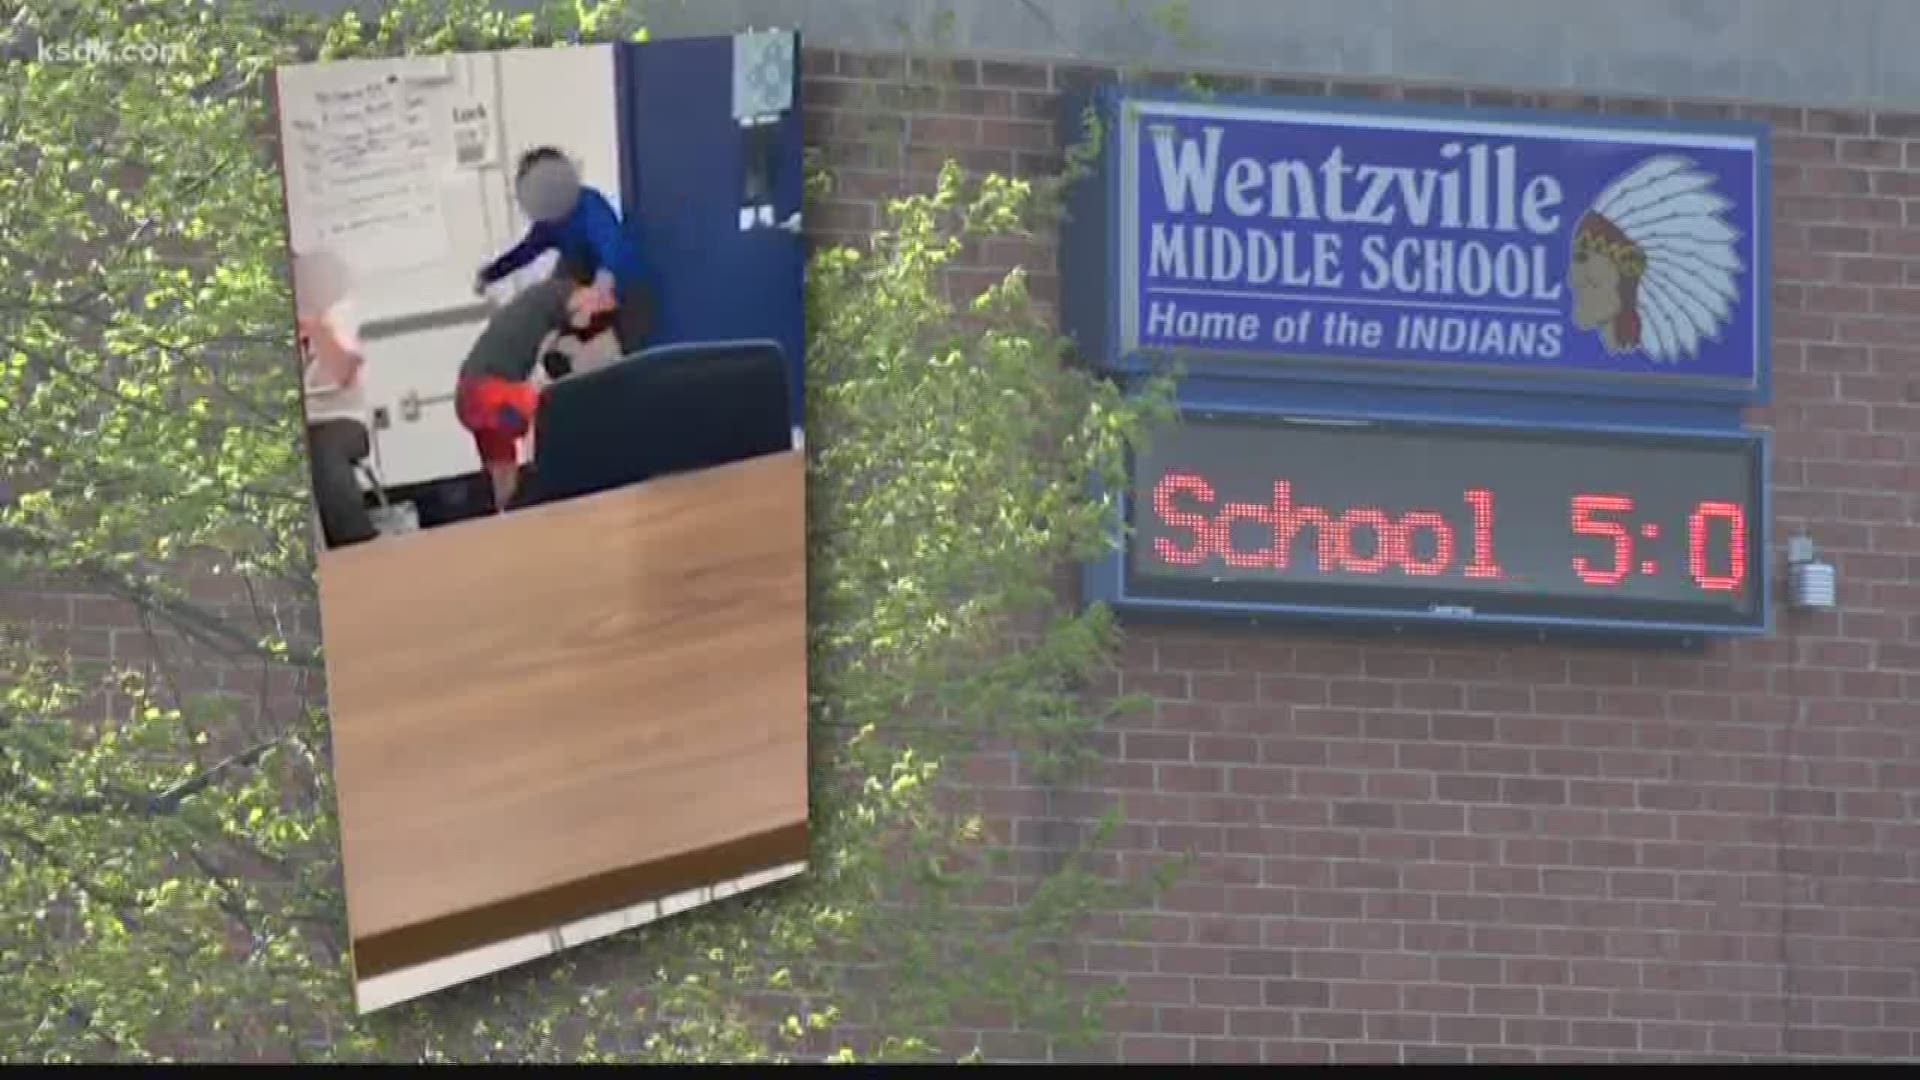 It's hard to watch, a Wentzville Middle School student being punched 19 times in the head, face and sides as he tried to protect himself.